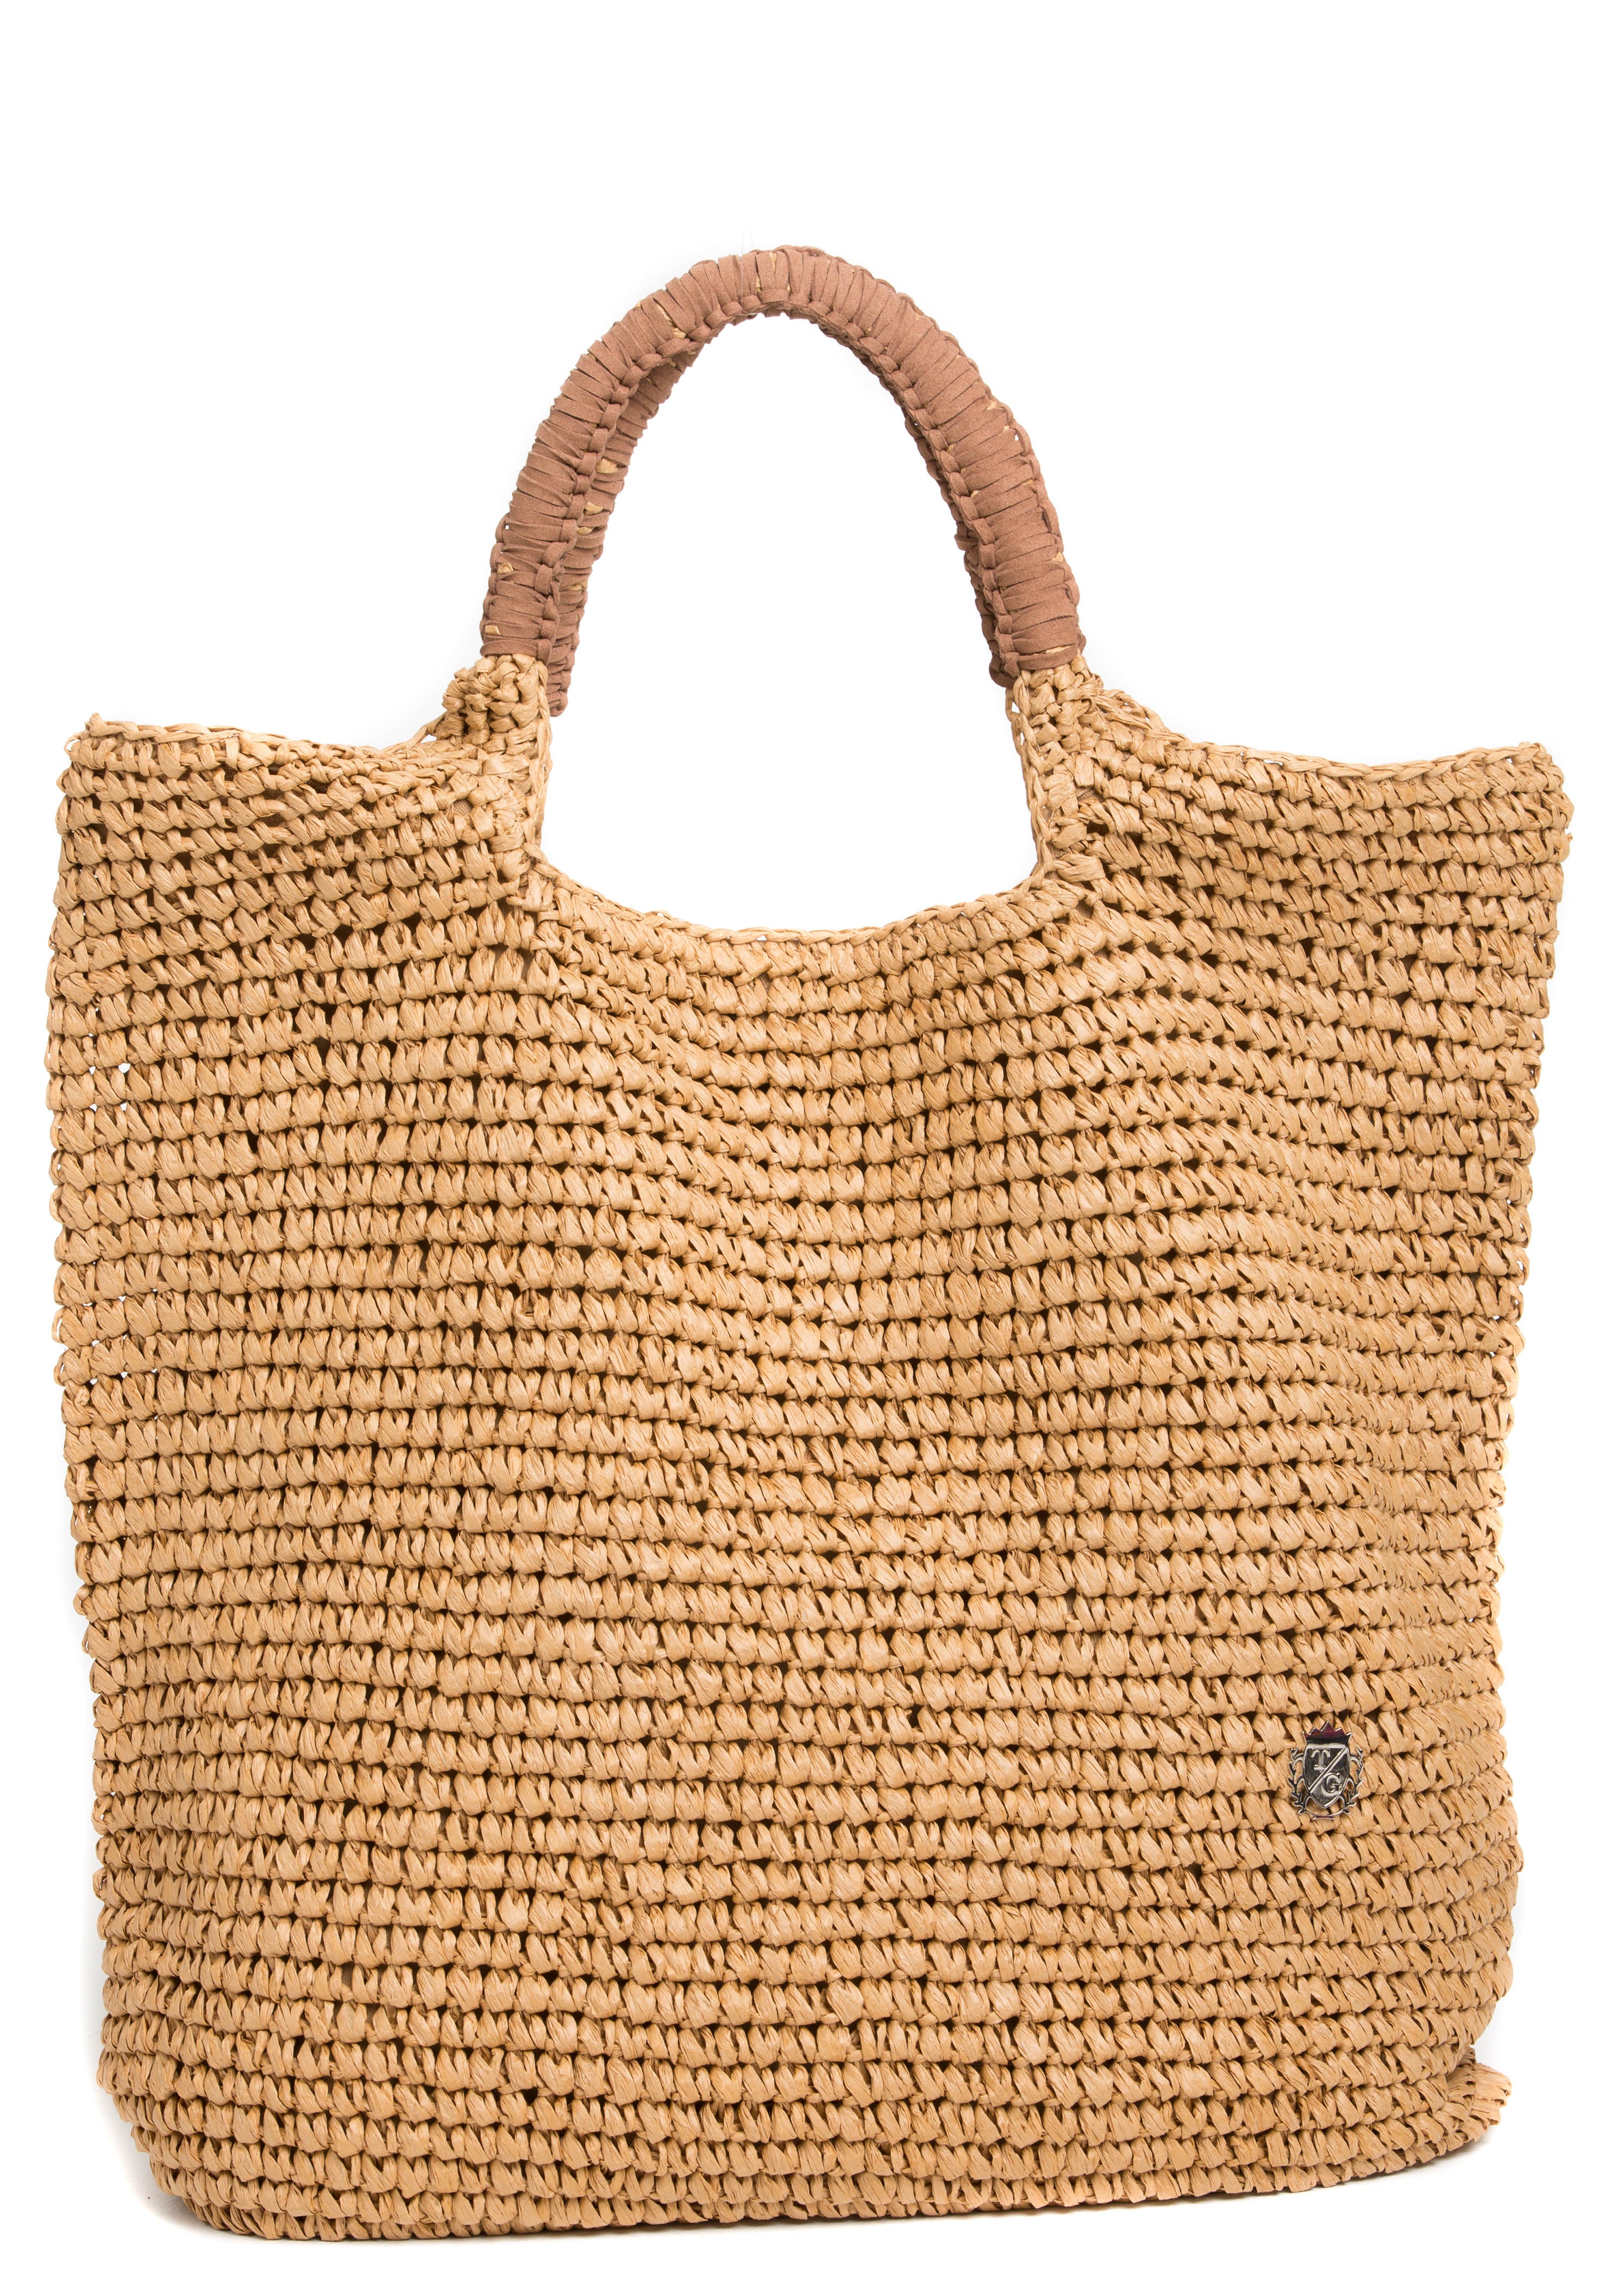 Raffia tote bag with leather handles - Light beige